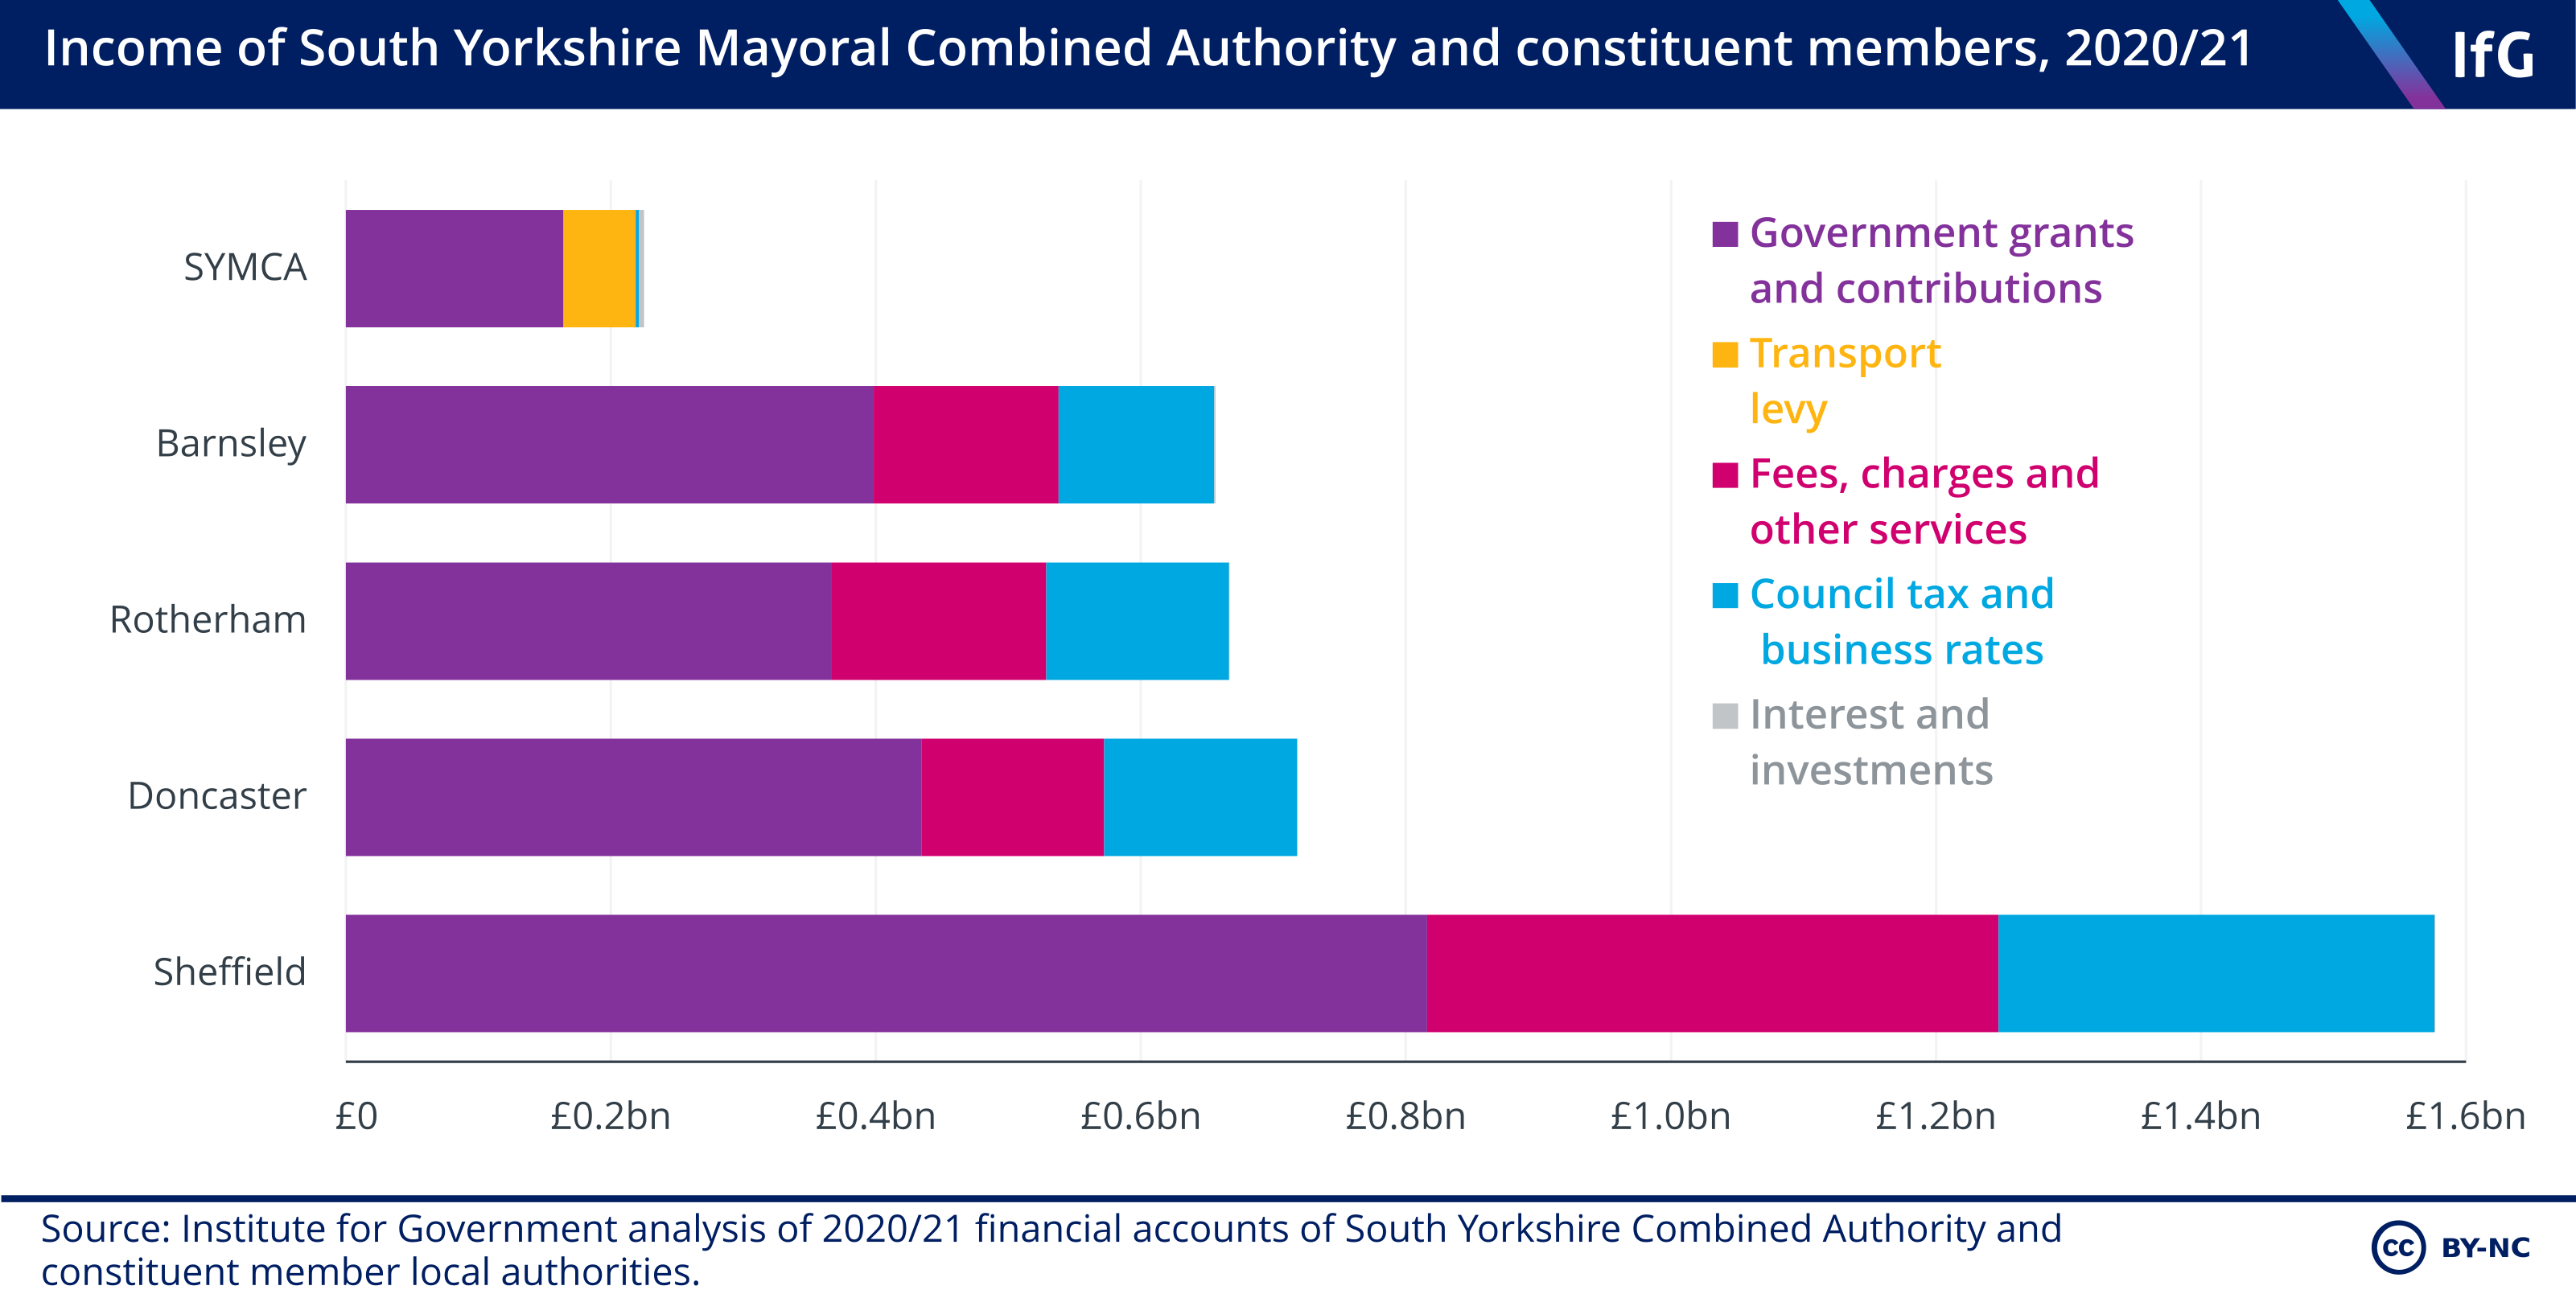 Income of South Yorkshire Mayoral Combined Authority and constituent members, 2020/21